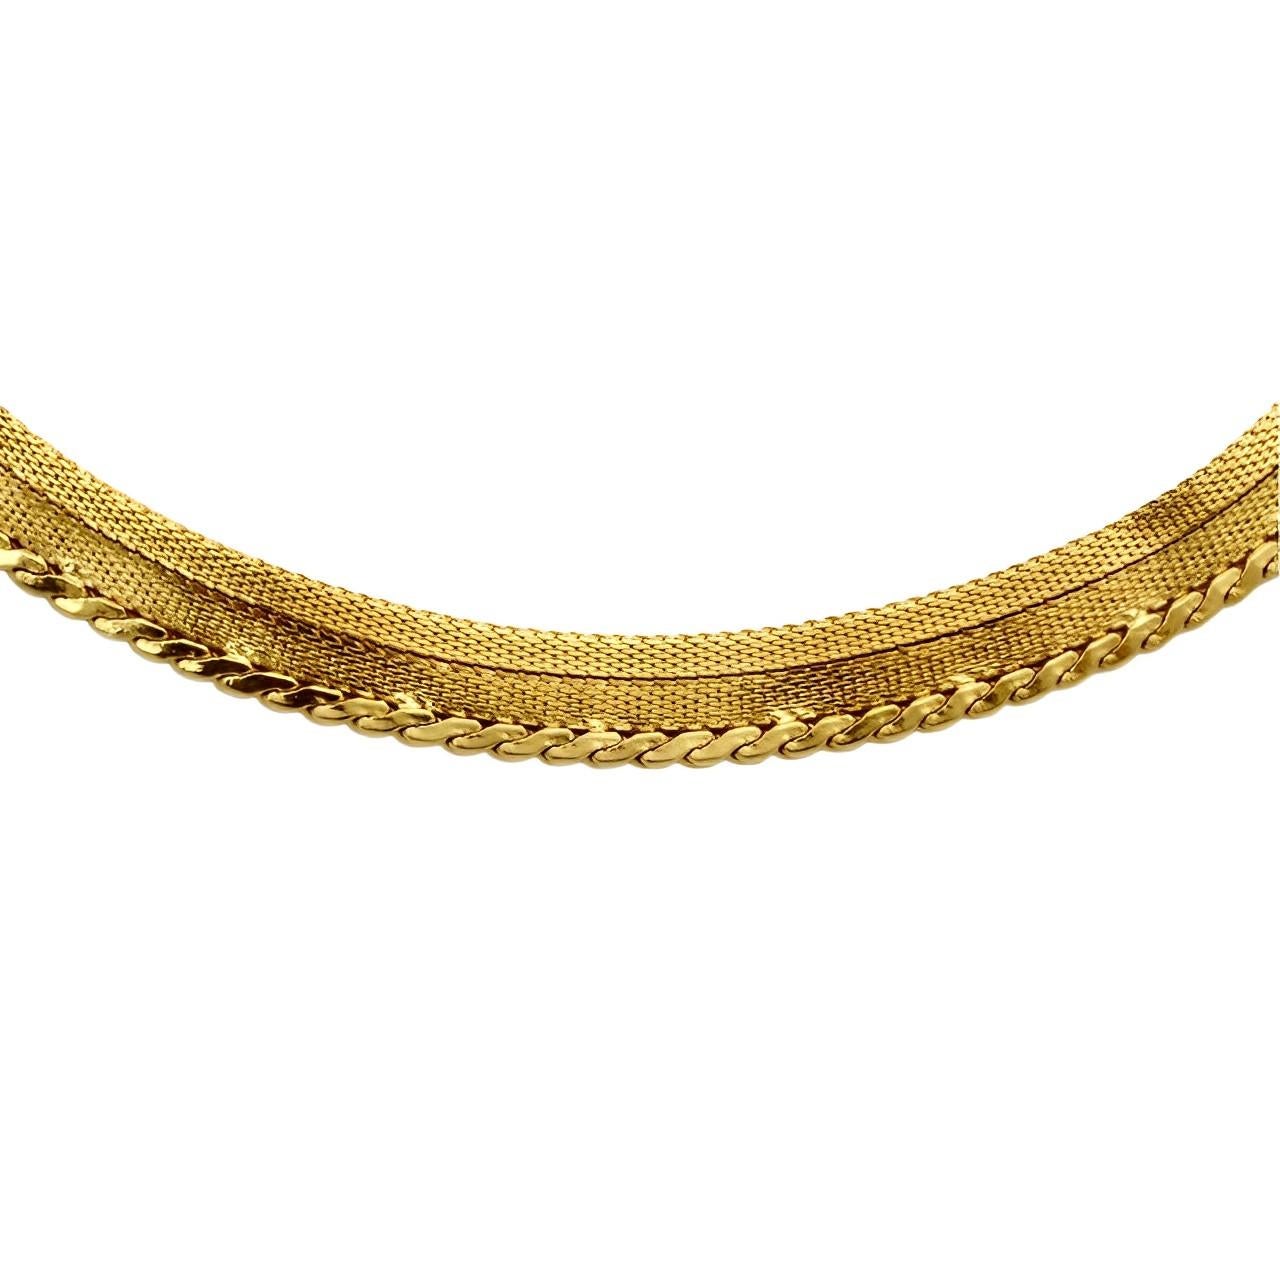 Gold Plated Chevron Mesh and Shiny Serpentine Collar Necklace circa 1980s For Sale 3